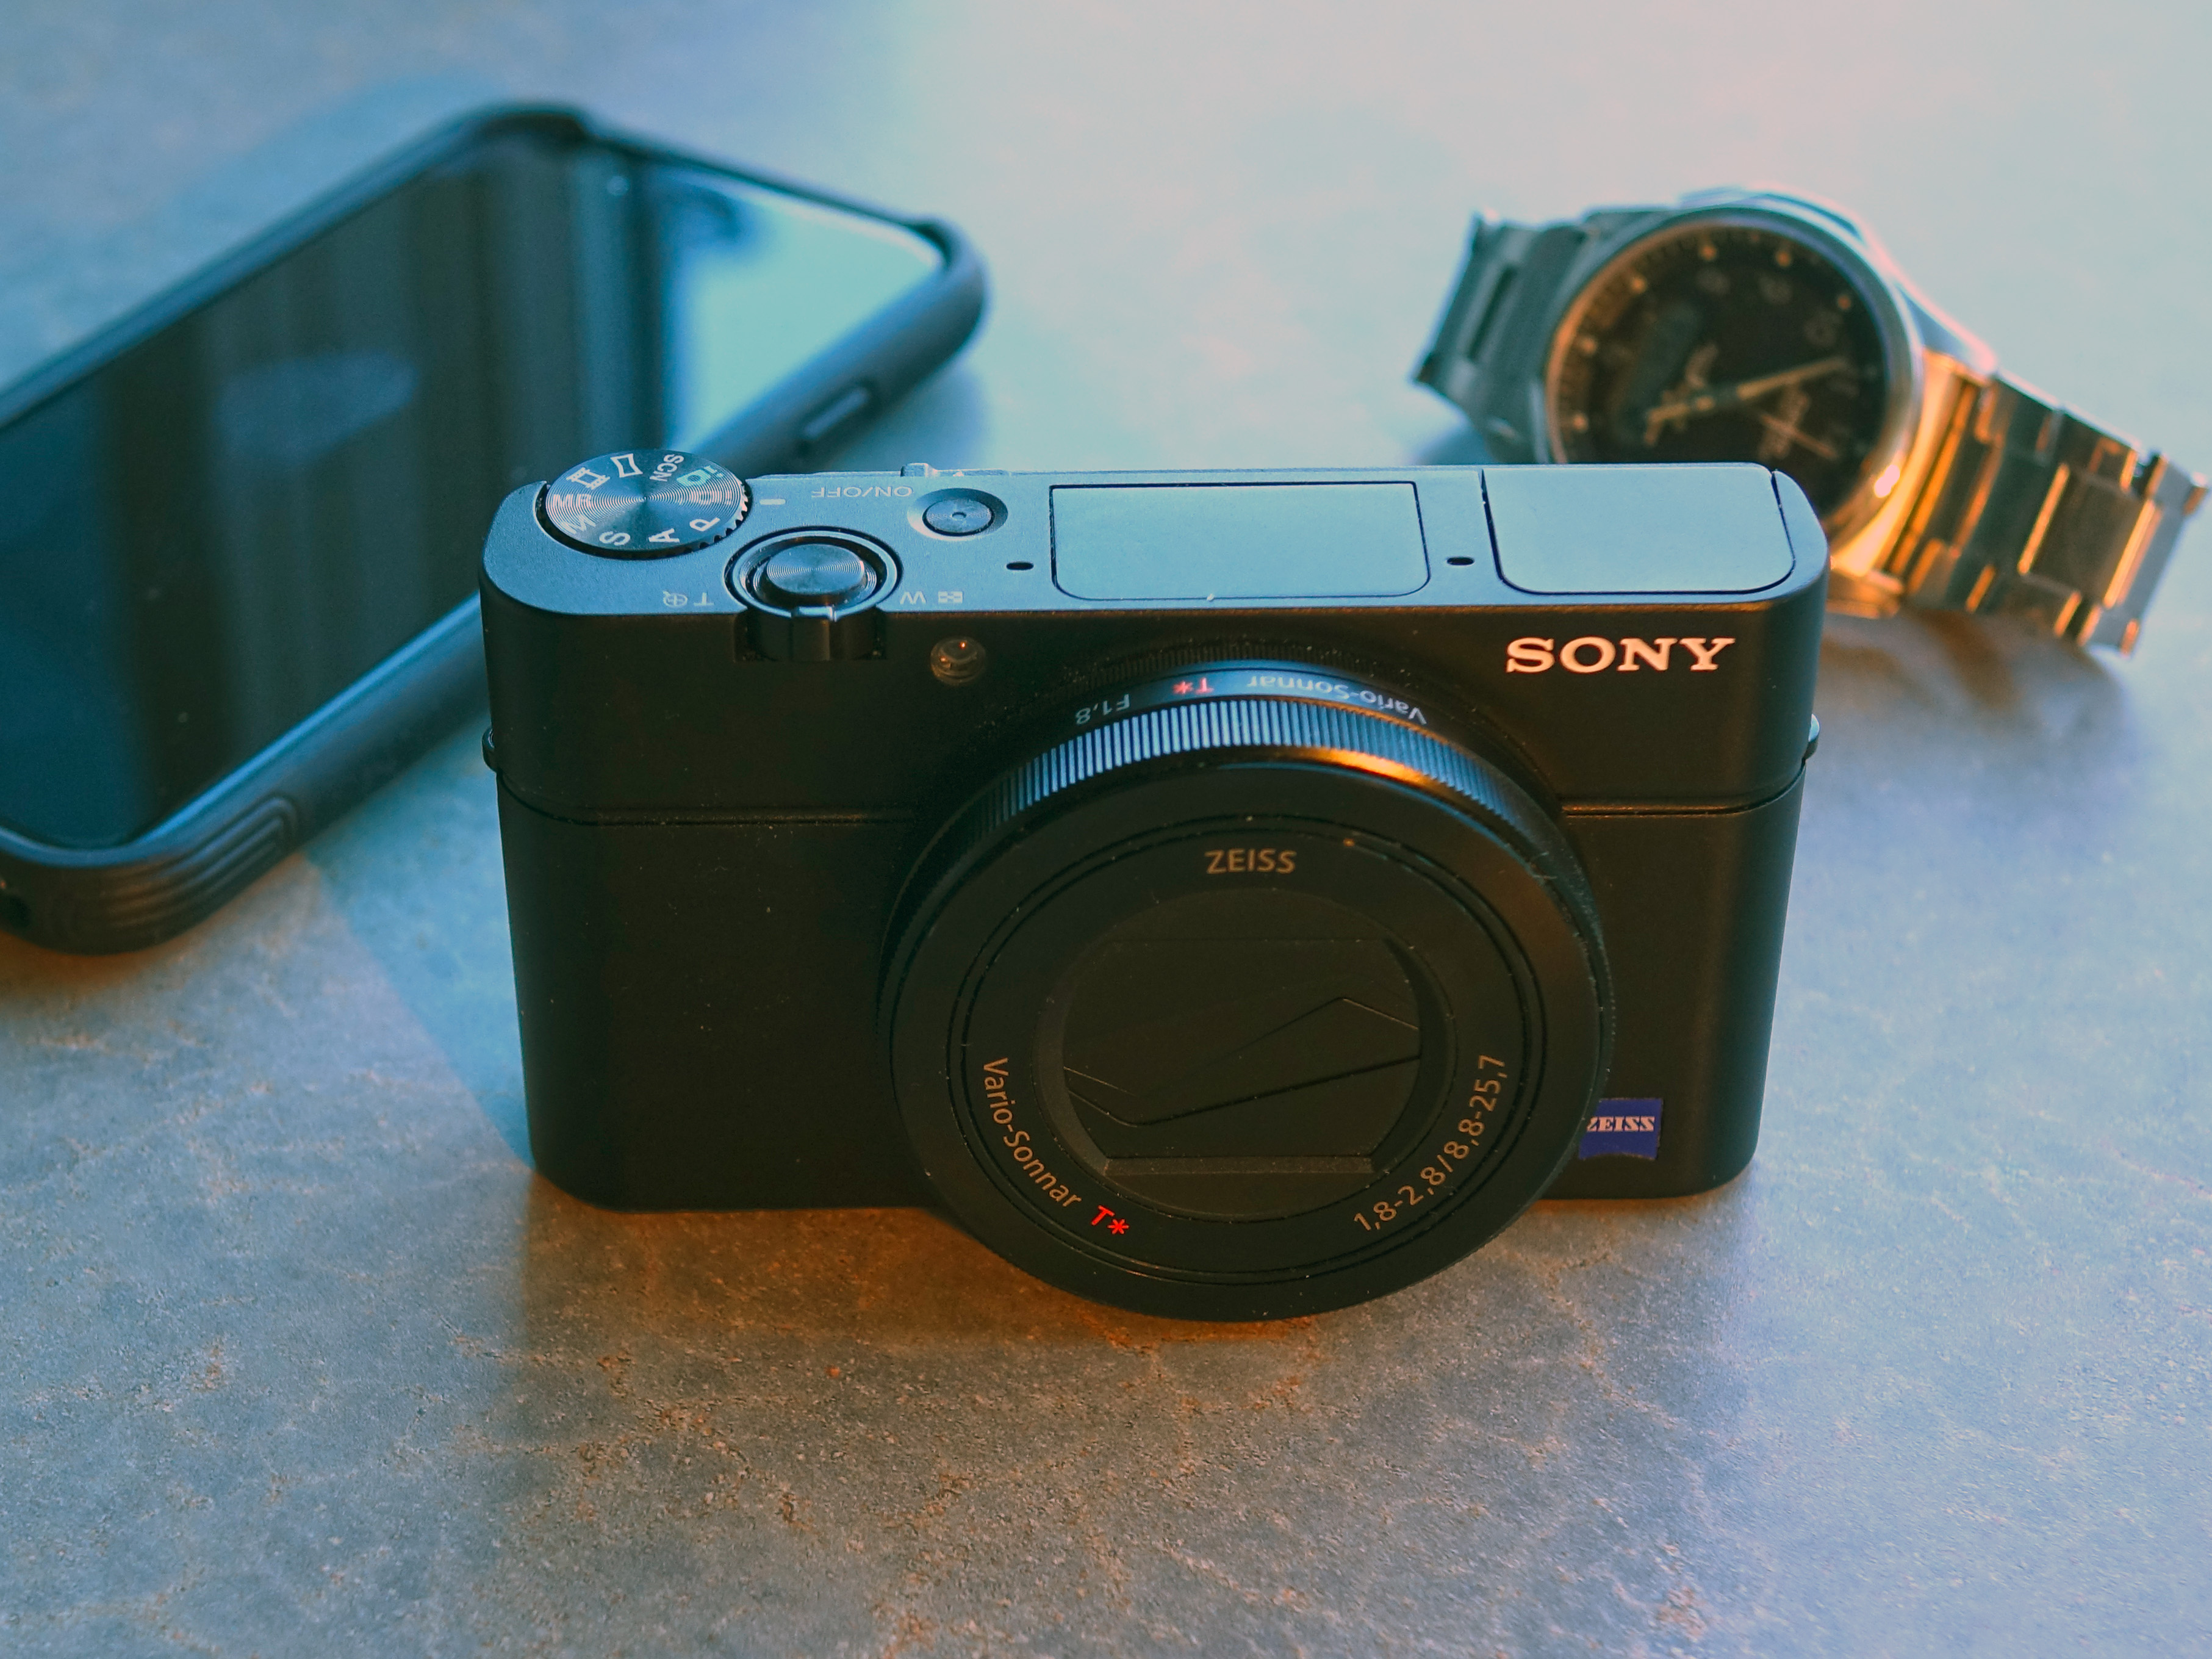 Detail view of Sony camera